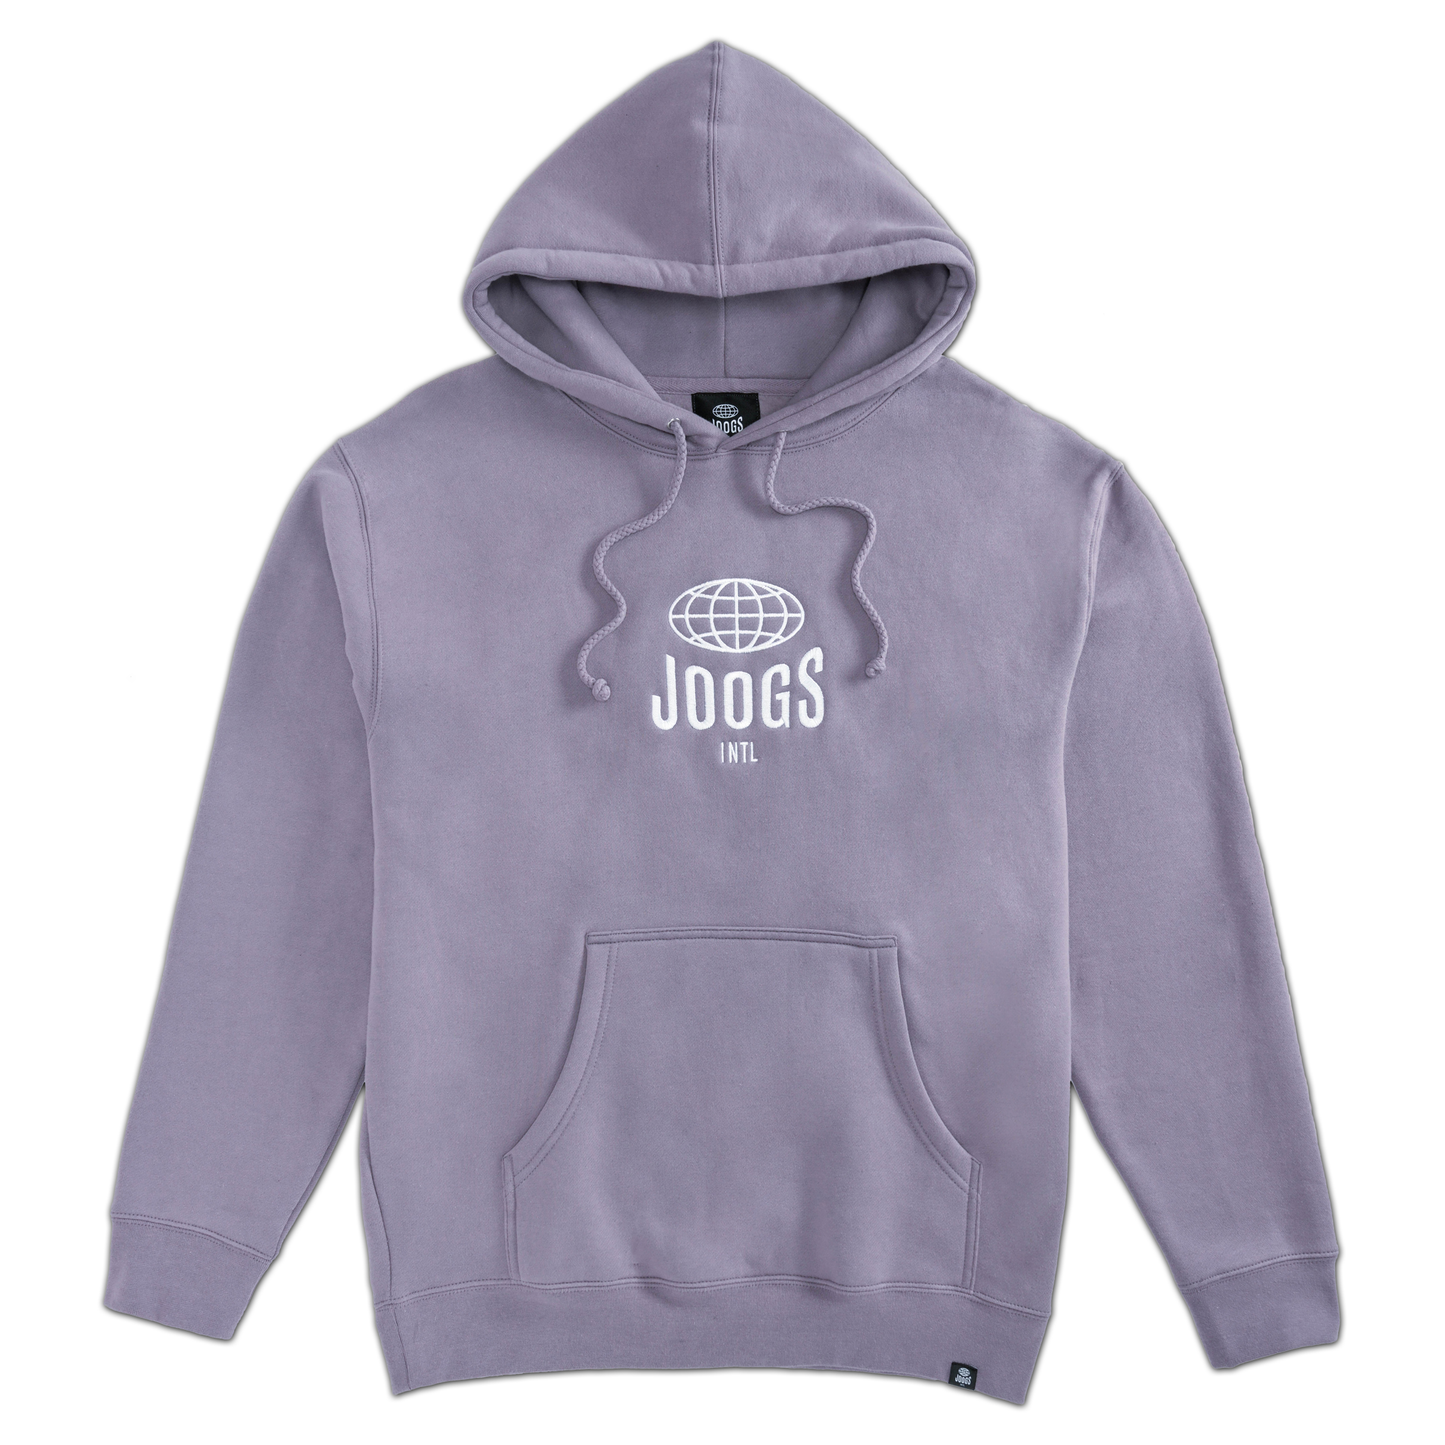 JOOGS EMBROIDERED LOGO HOODIE - DUSTY GRAPE - FRONT PRODUCT SHOT